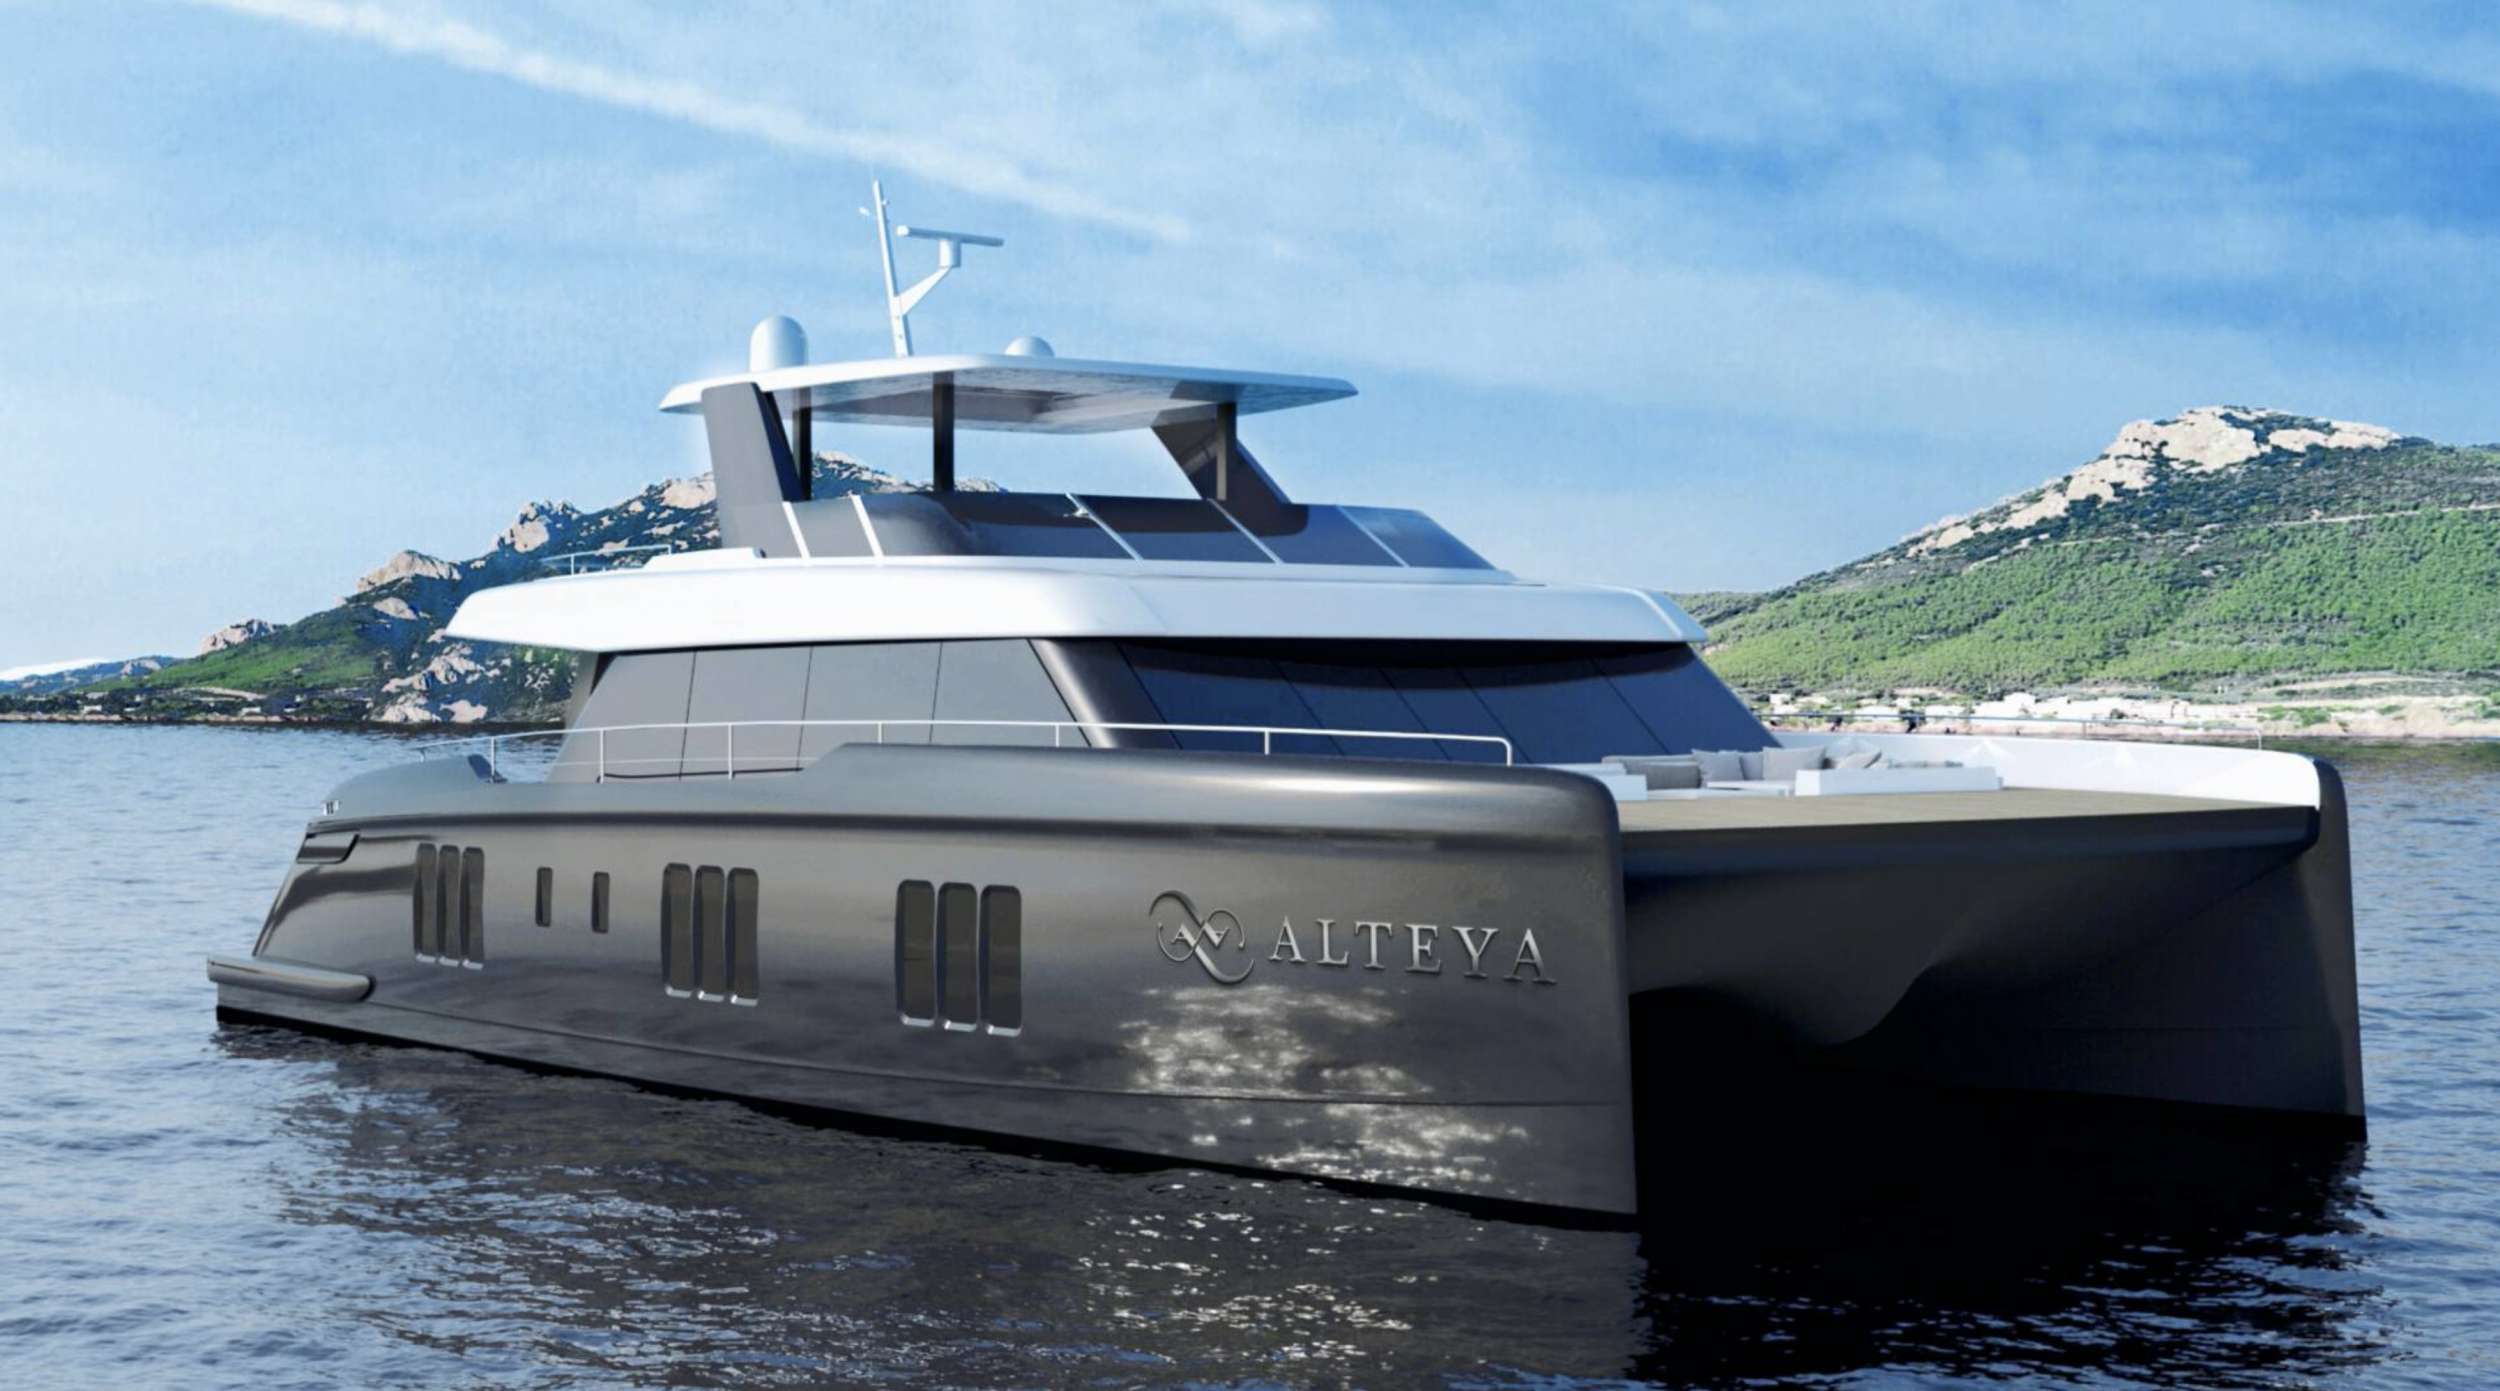 The yacht is to be delivered February 2021.
